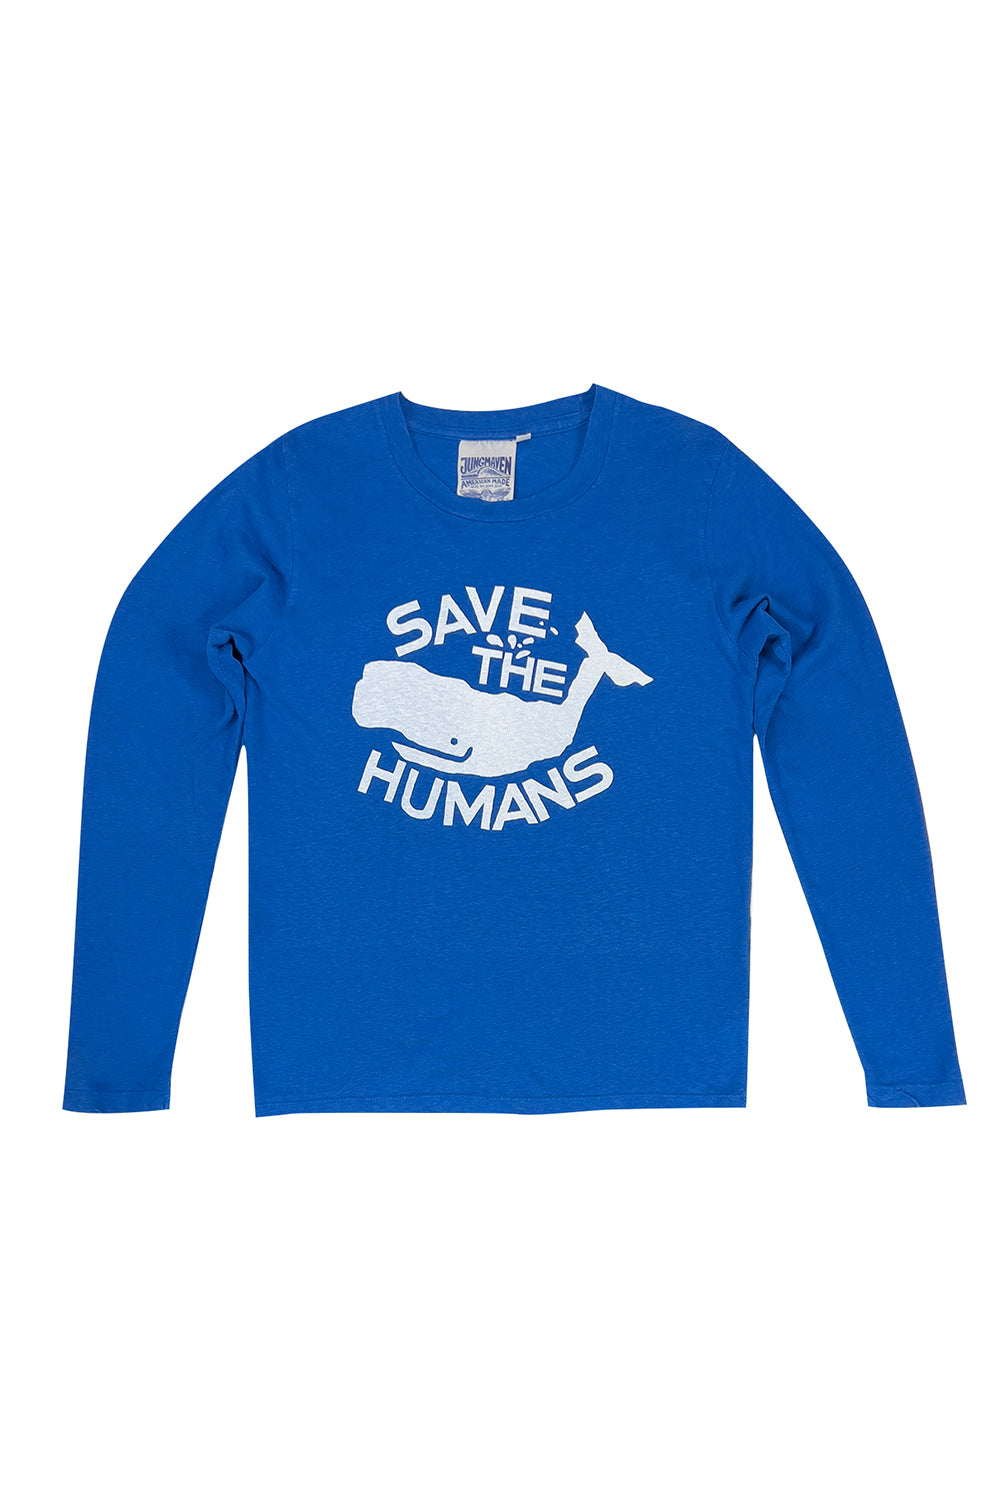 Save the Humans Encanto Long Sleeve Tee | Jungmaven Hemp Clothing & Accessories / Color: Galaxy Blue